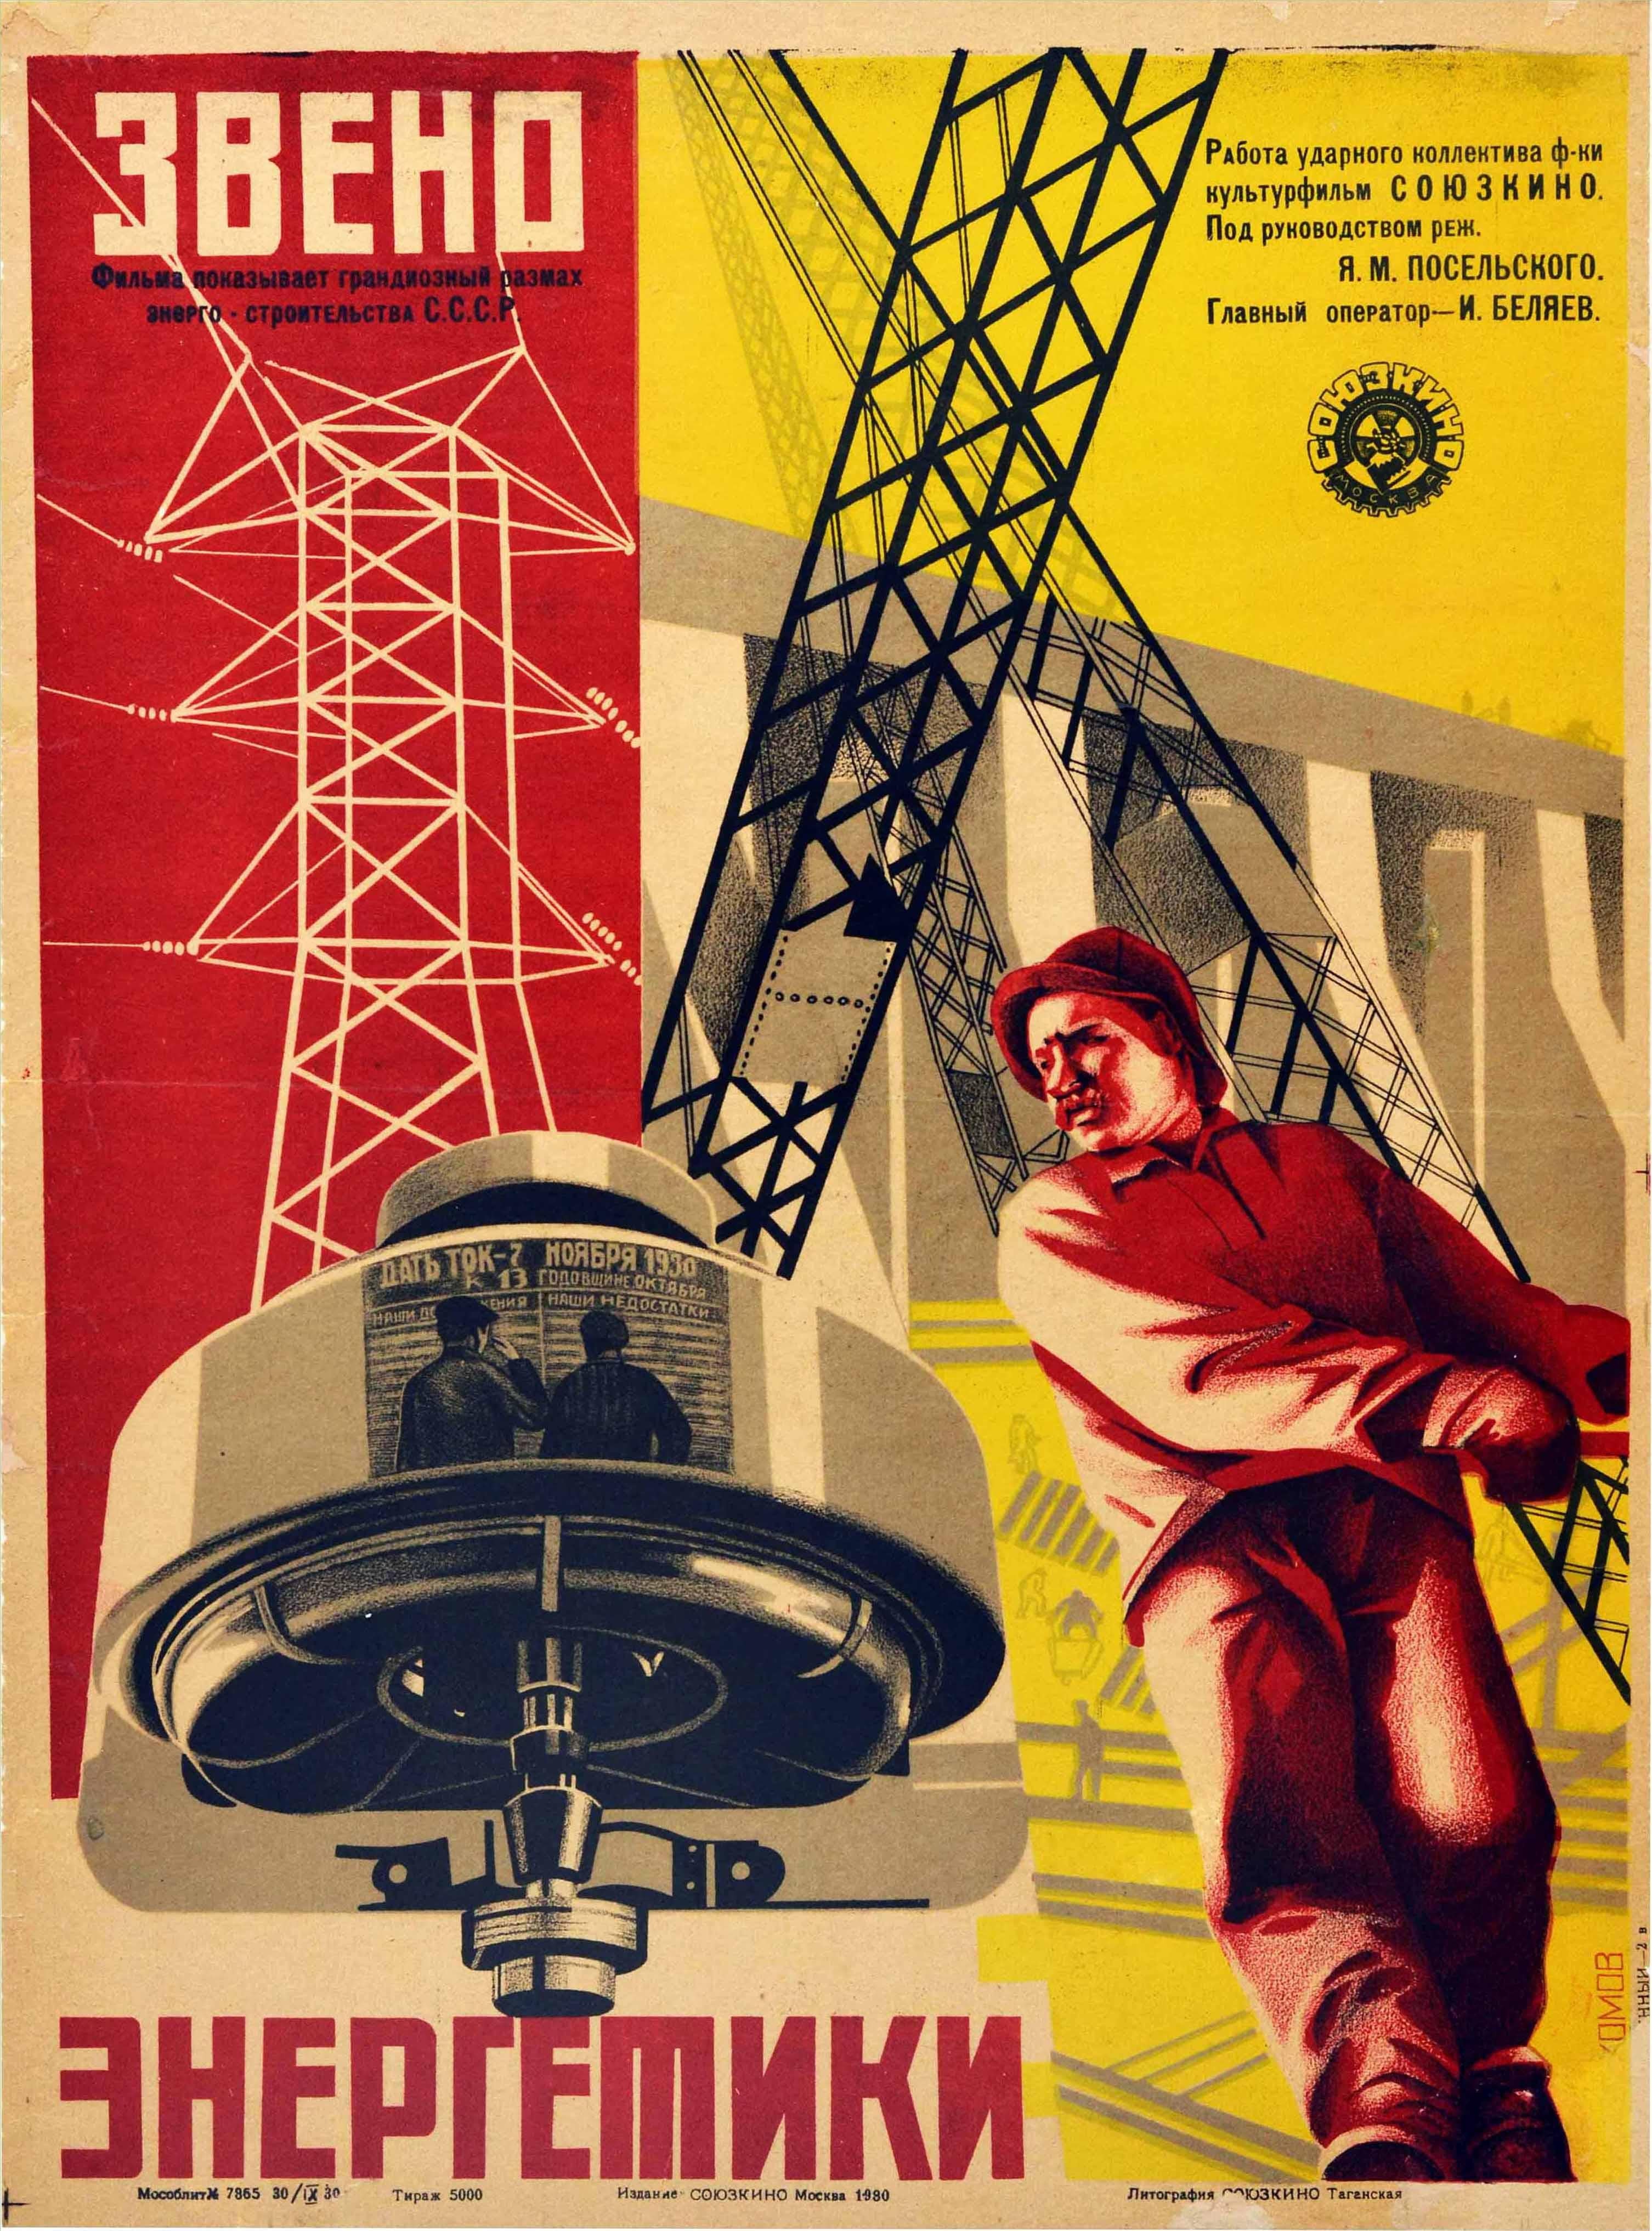 Original vintage Soviet movie poster for the 1930 documentary Energy Link / ????? ?????????? celebrating the grandiose scope of energy construction in the USSR directed by Yakov Poselskiy and produced by the Soyuzkino film studio (the USSR State